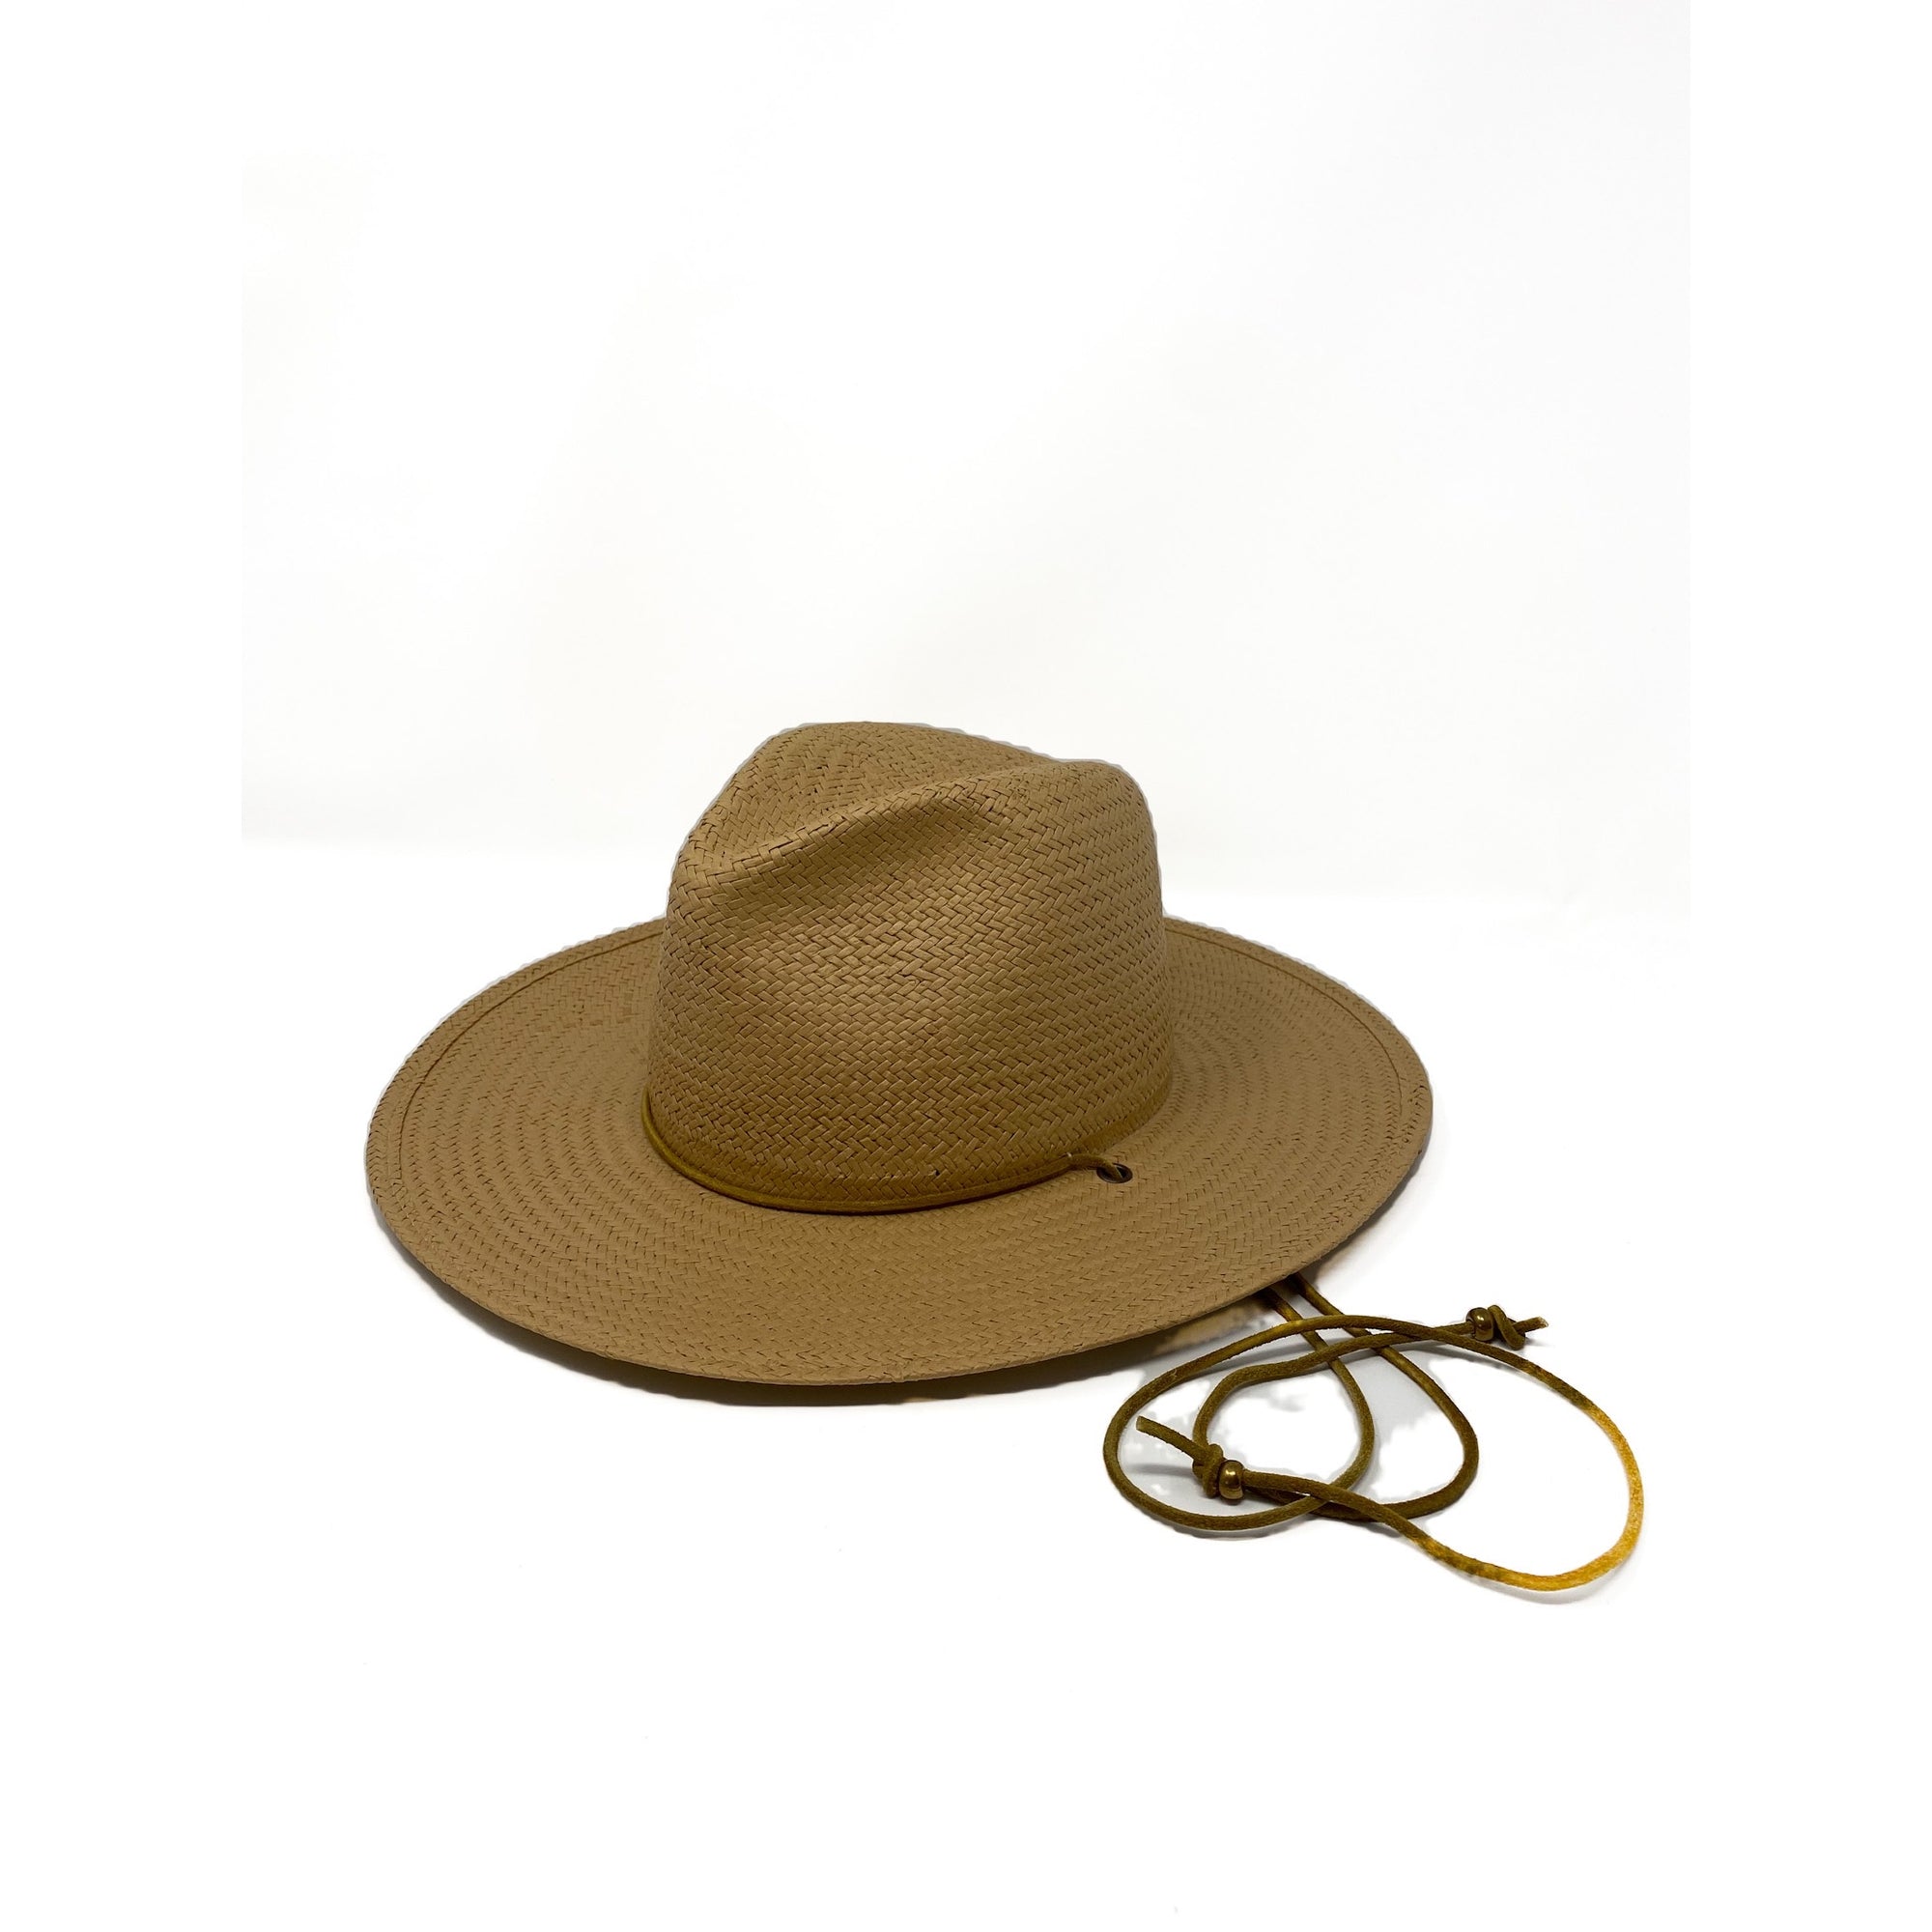 SEDONA Straw Packable Hat Natural - Lovely Bird